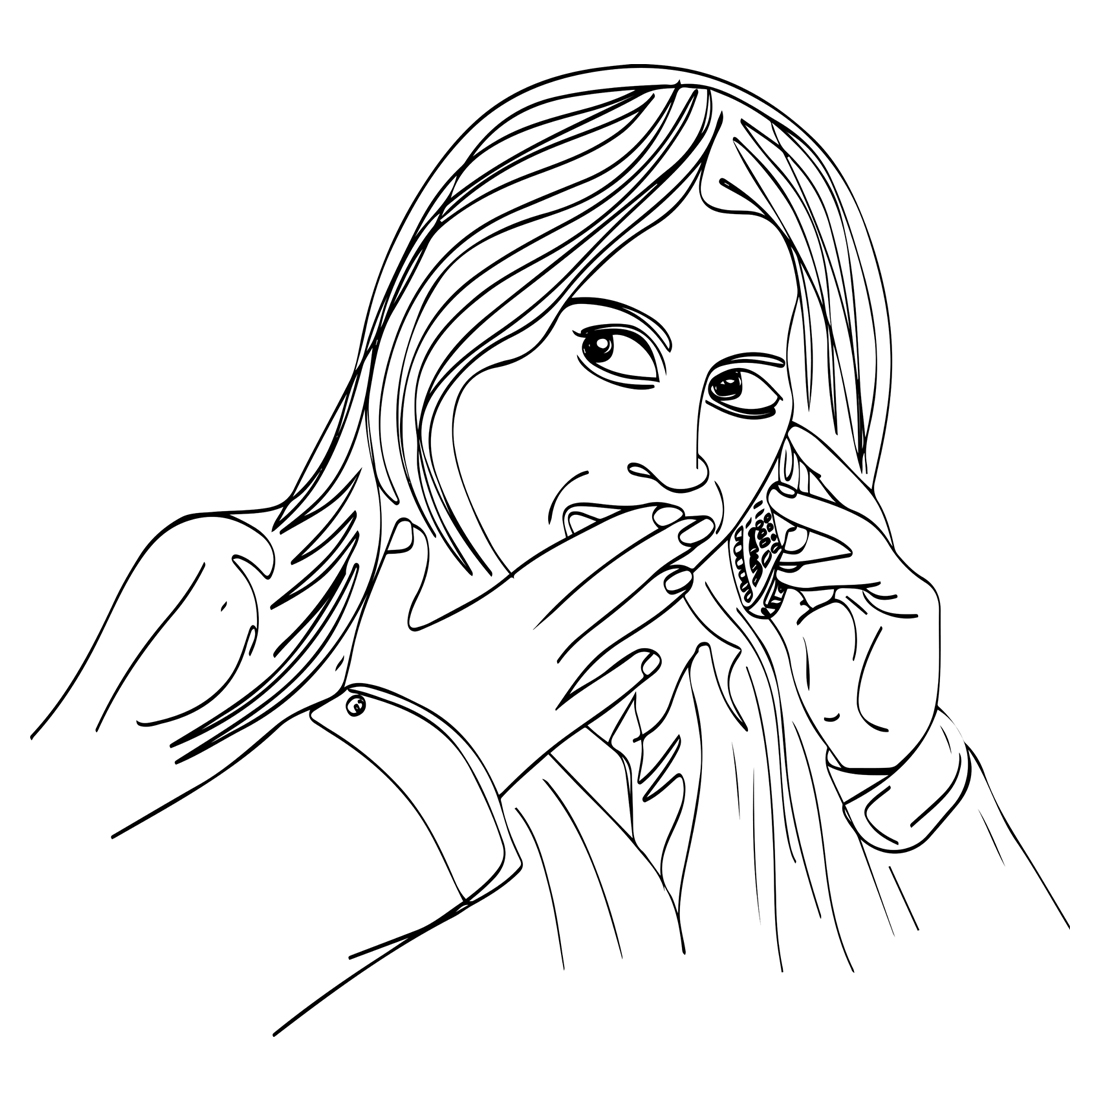 Young Women Gossiping on Phone Illustration, Smartphone Laughter: Sketch Cartoon of Young Women with Funny Faces, Young Woman Holding Smartphone Cartoon preview image.